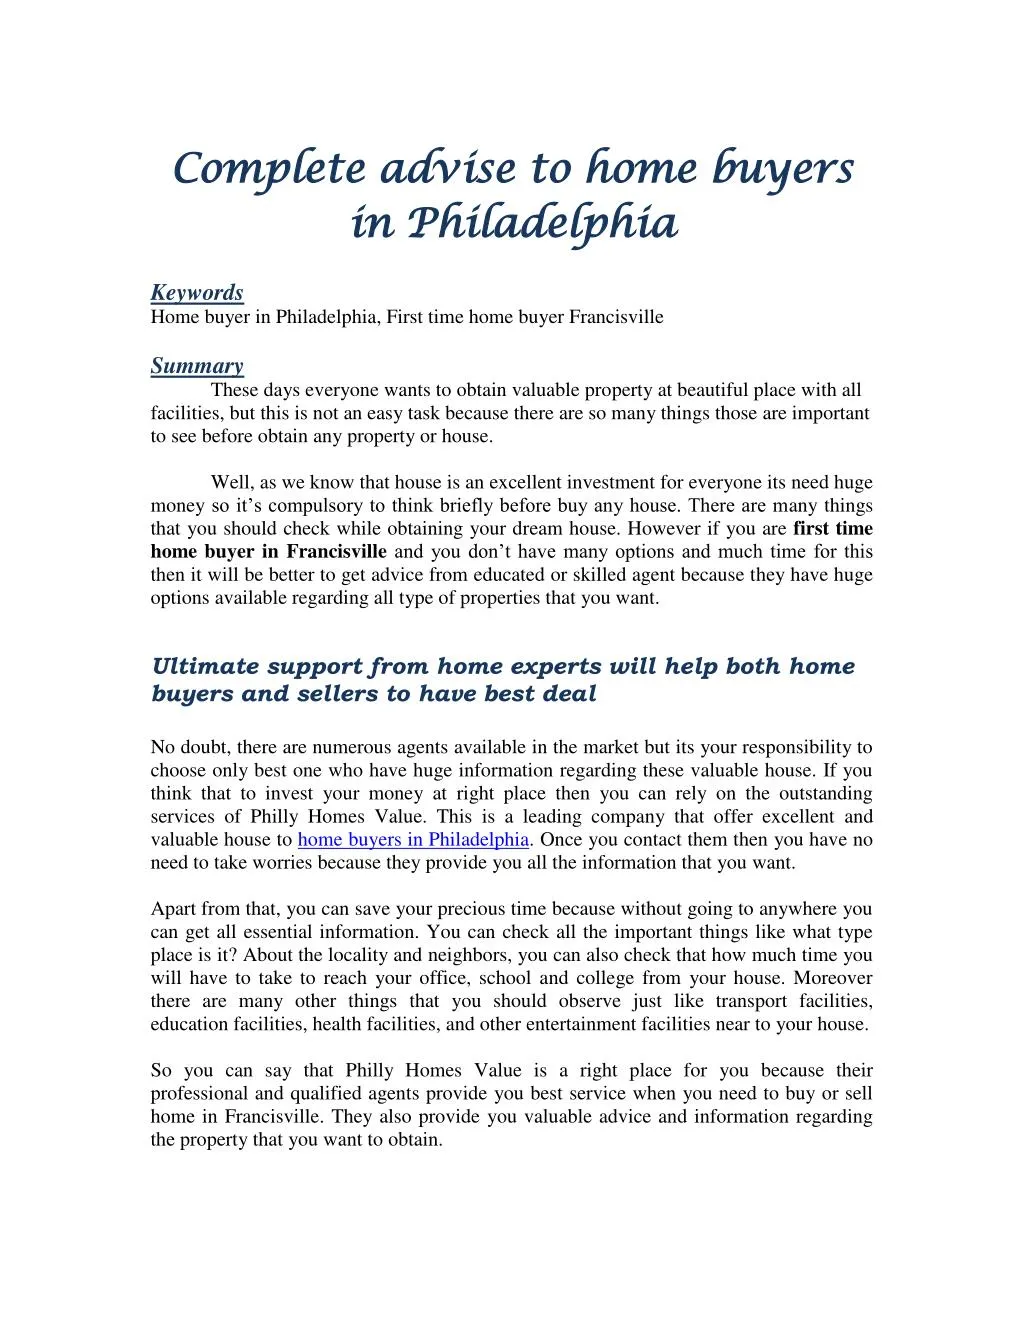 complete advise to home buyers complete advise